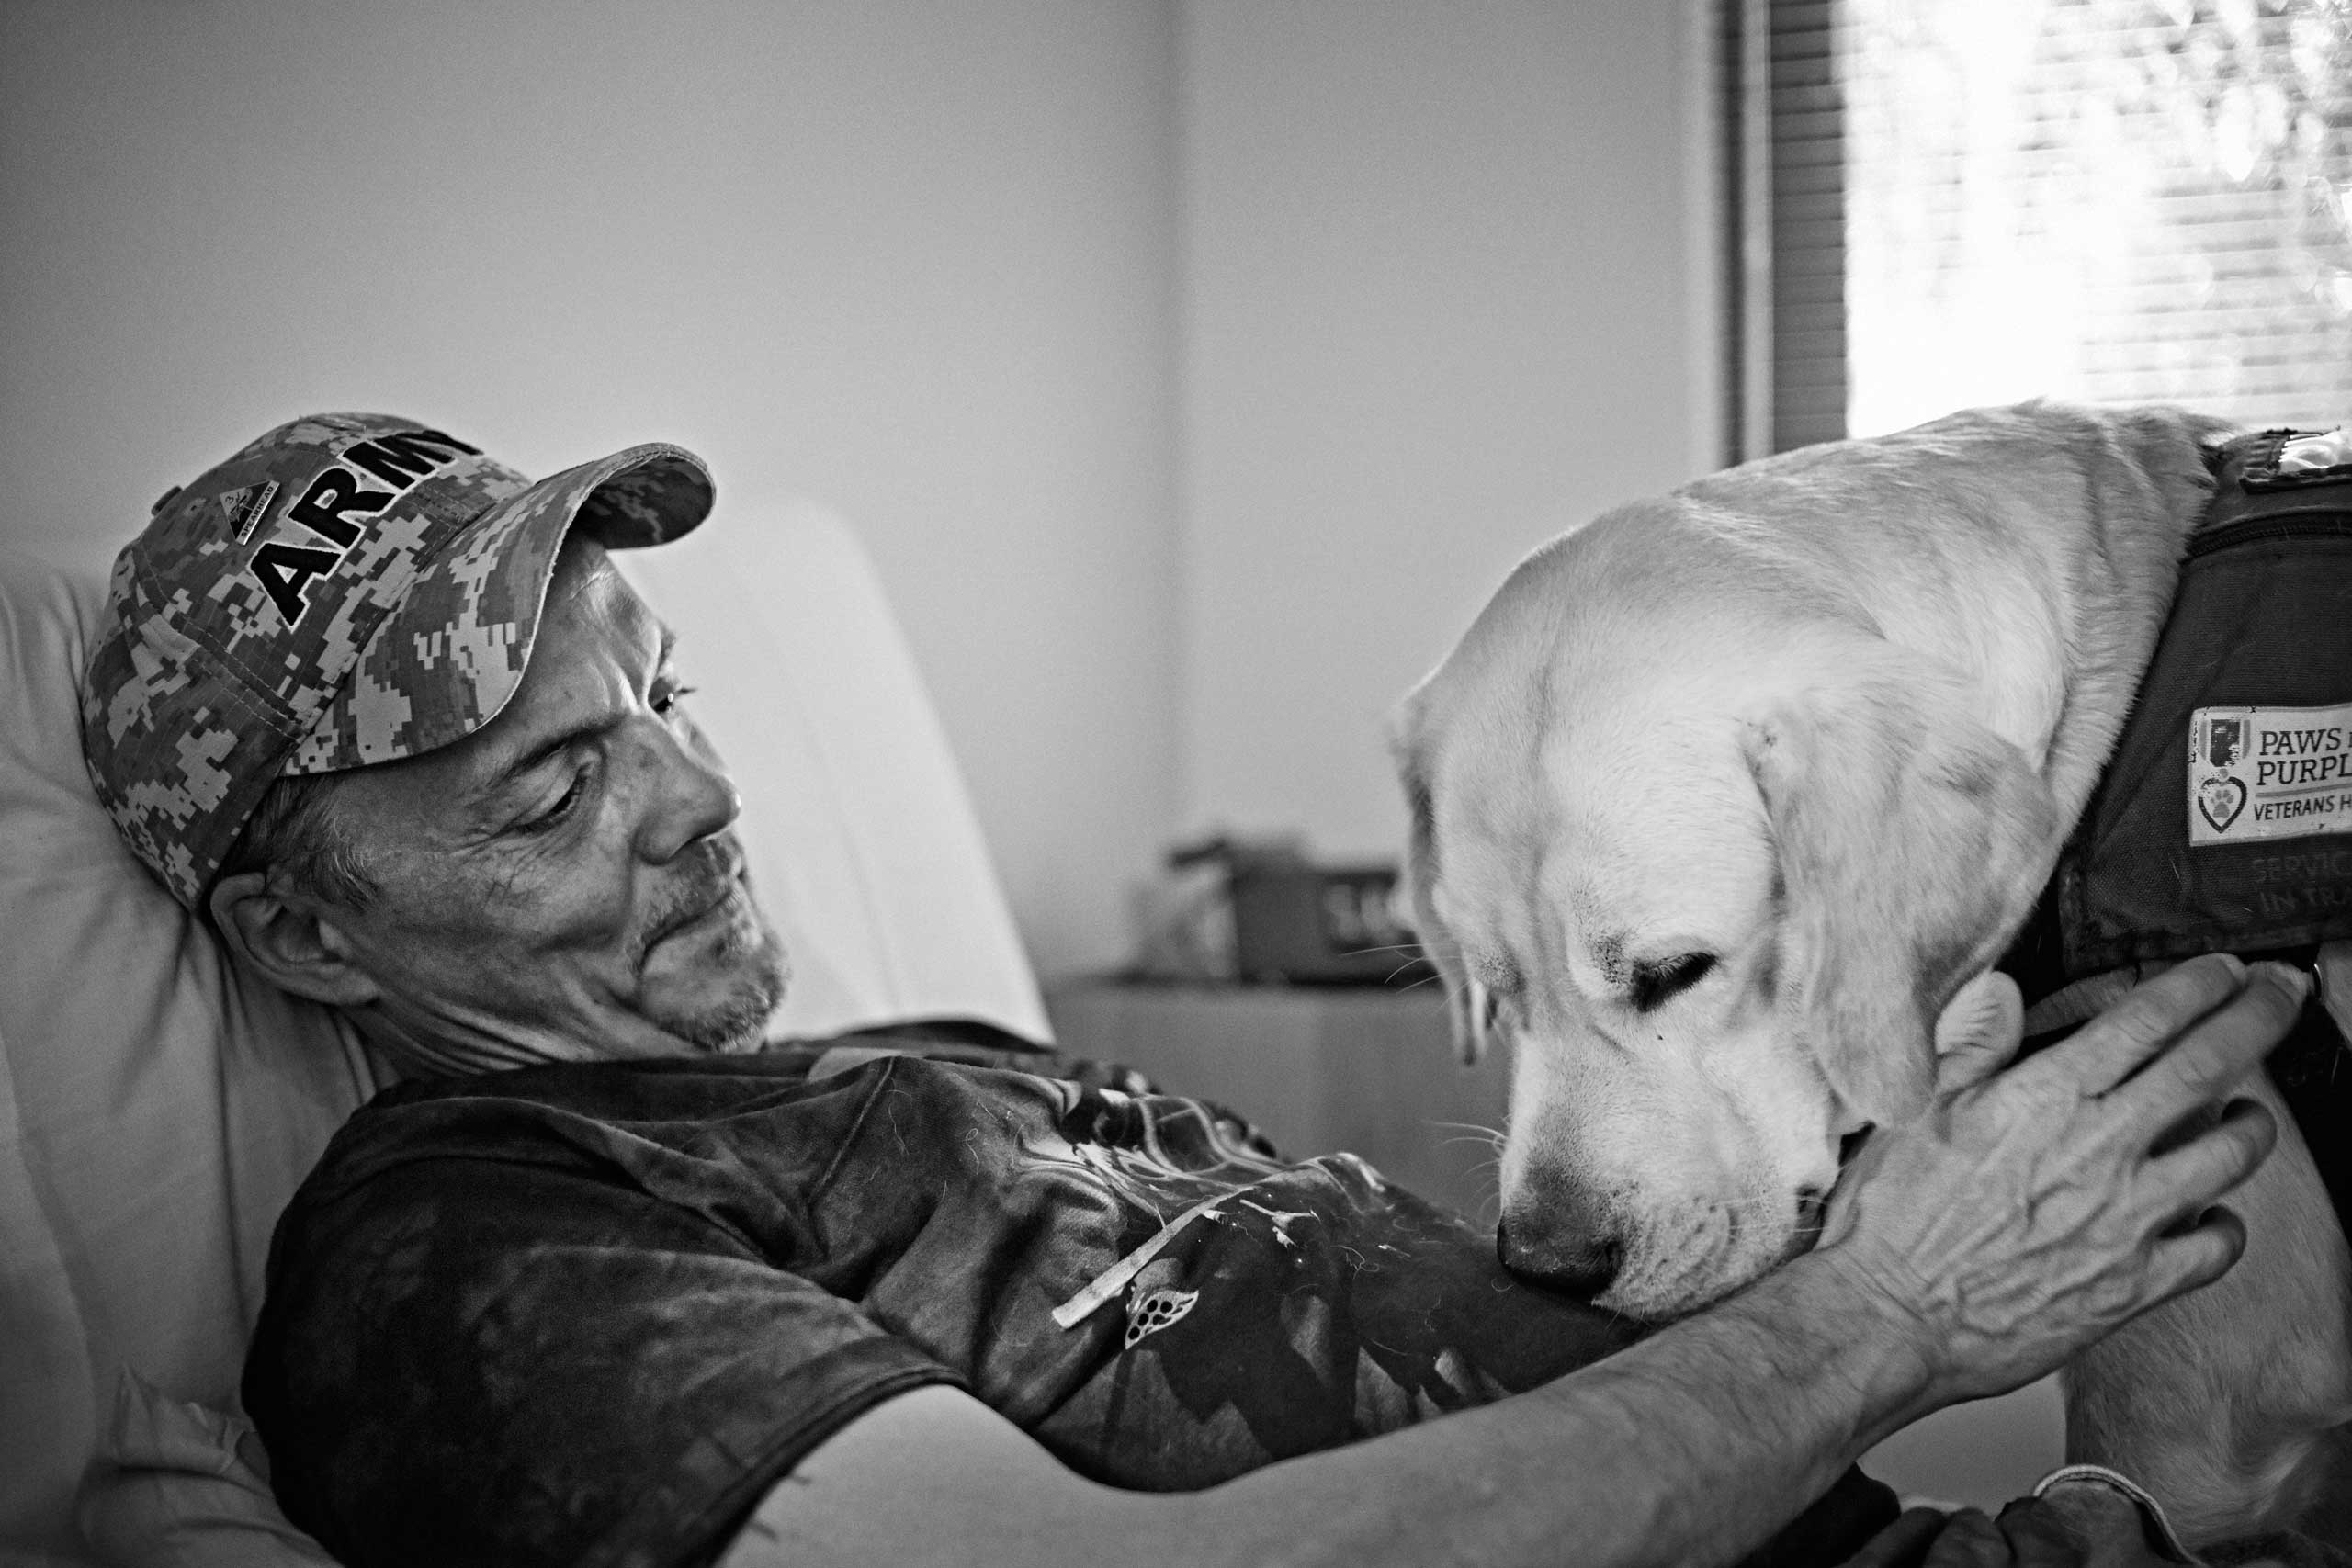 Veteran Chris Gash whit a service dog at the VA’s Menlo Park campus in California, United States on October 3, 2014.
                              
                              US Army Veteran Chris Gash served with 3rd Armored Division, 12th Combat Engineer Battalion and were deployed to Iraq during Operation Desert Storm with Task Force 4/8th in 1991.
                              
                              Paws for Purple Hearts is the first program of its kind to offer therapeutic intervention for Veterans and active-duty military personnel by teaching those with Post-Traumatic Stress Disorder (PTSD) to train service dogs for their comrades with combat-related injuries.